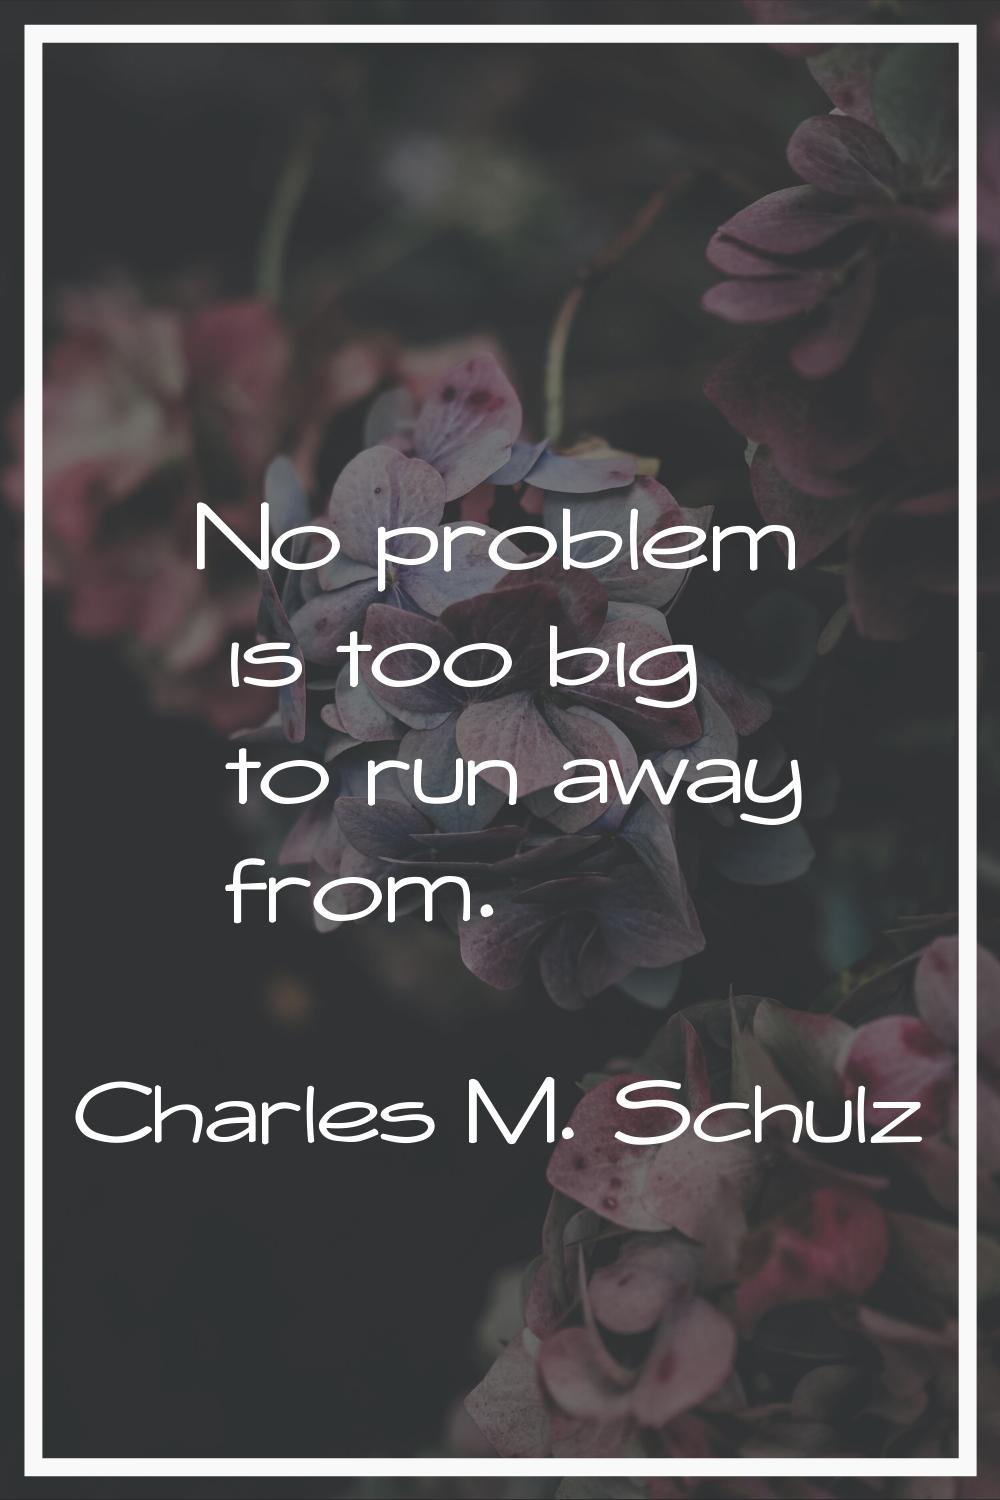 No problem is too big to run away from.